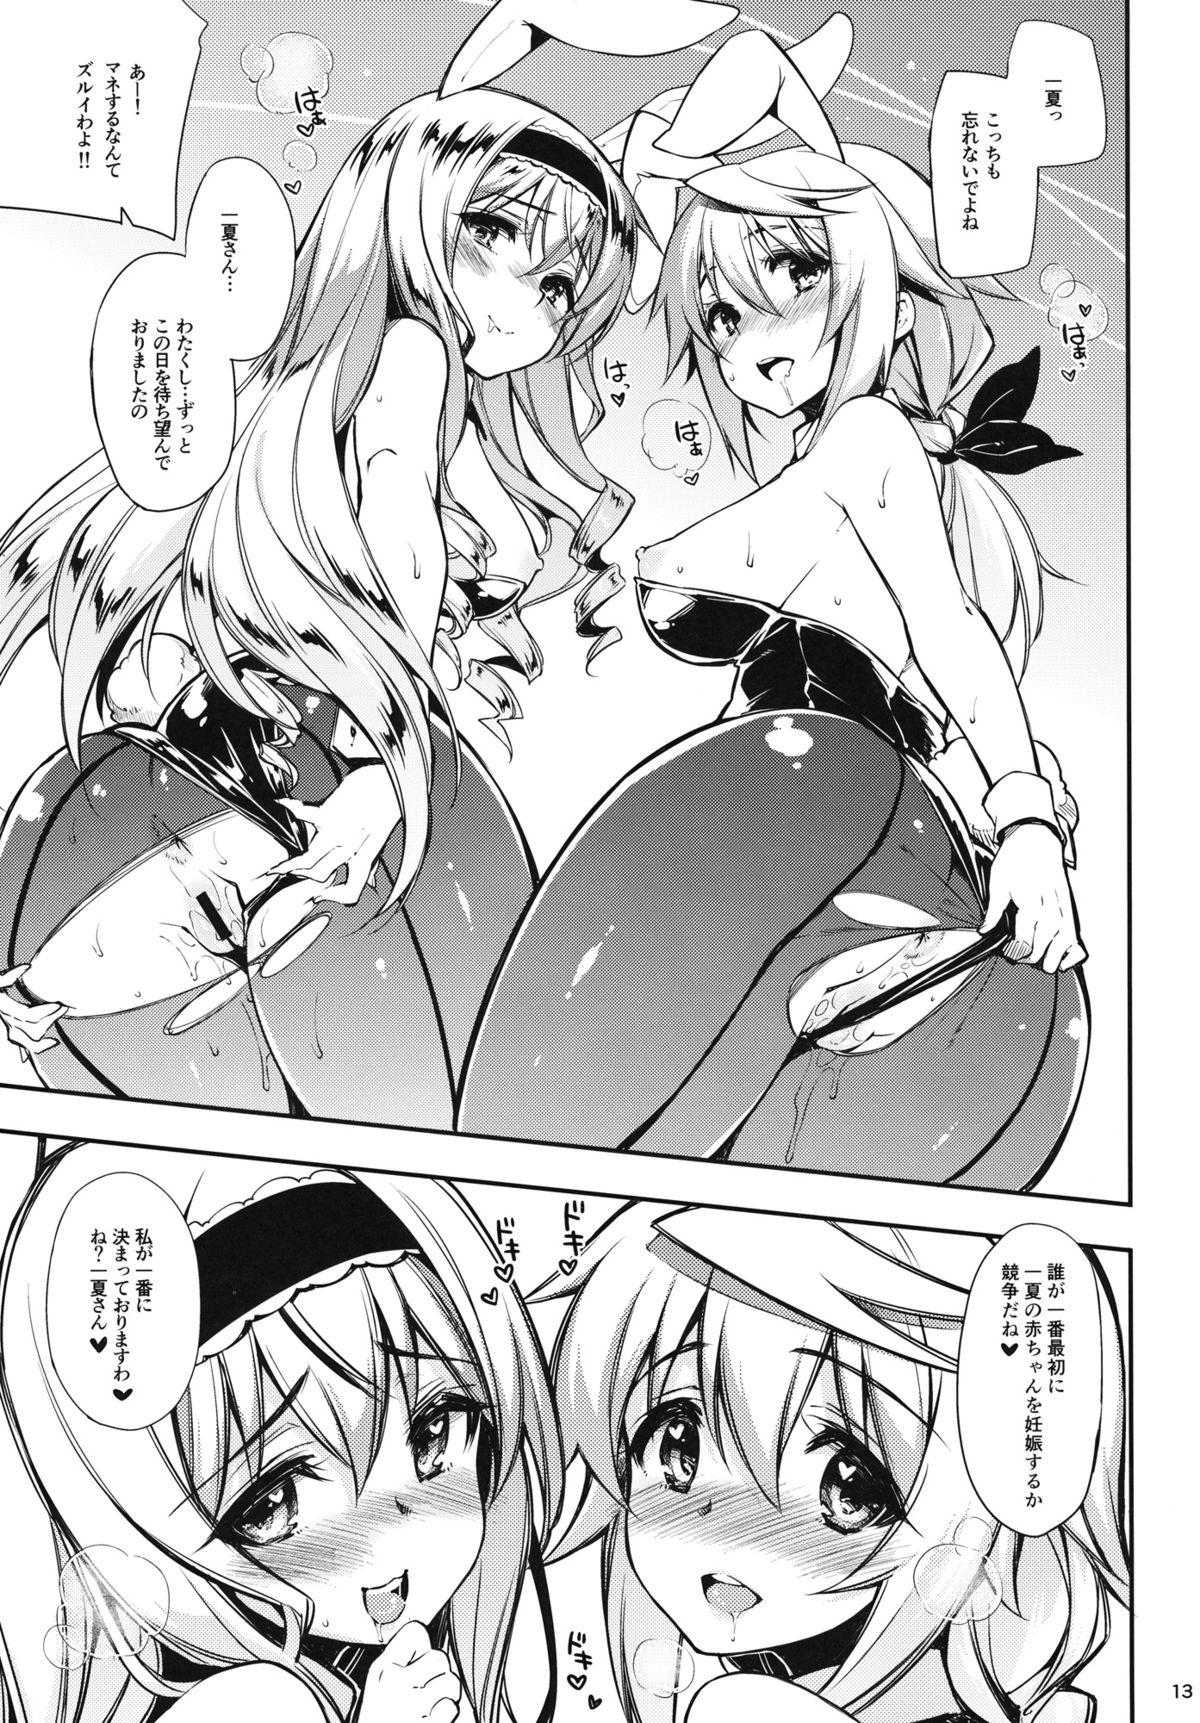 Soapy ONE night SUMMER - Infinite stratos Bang - Page 12